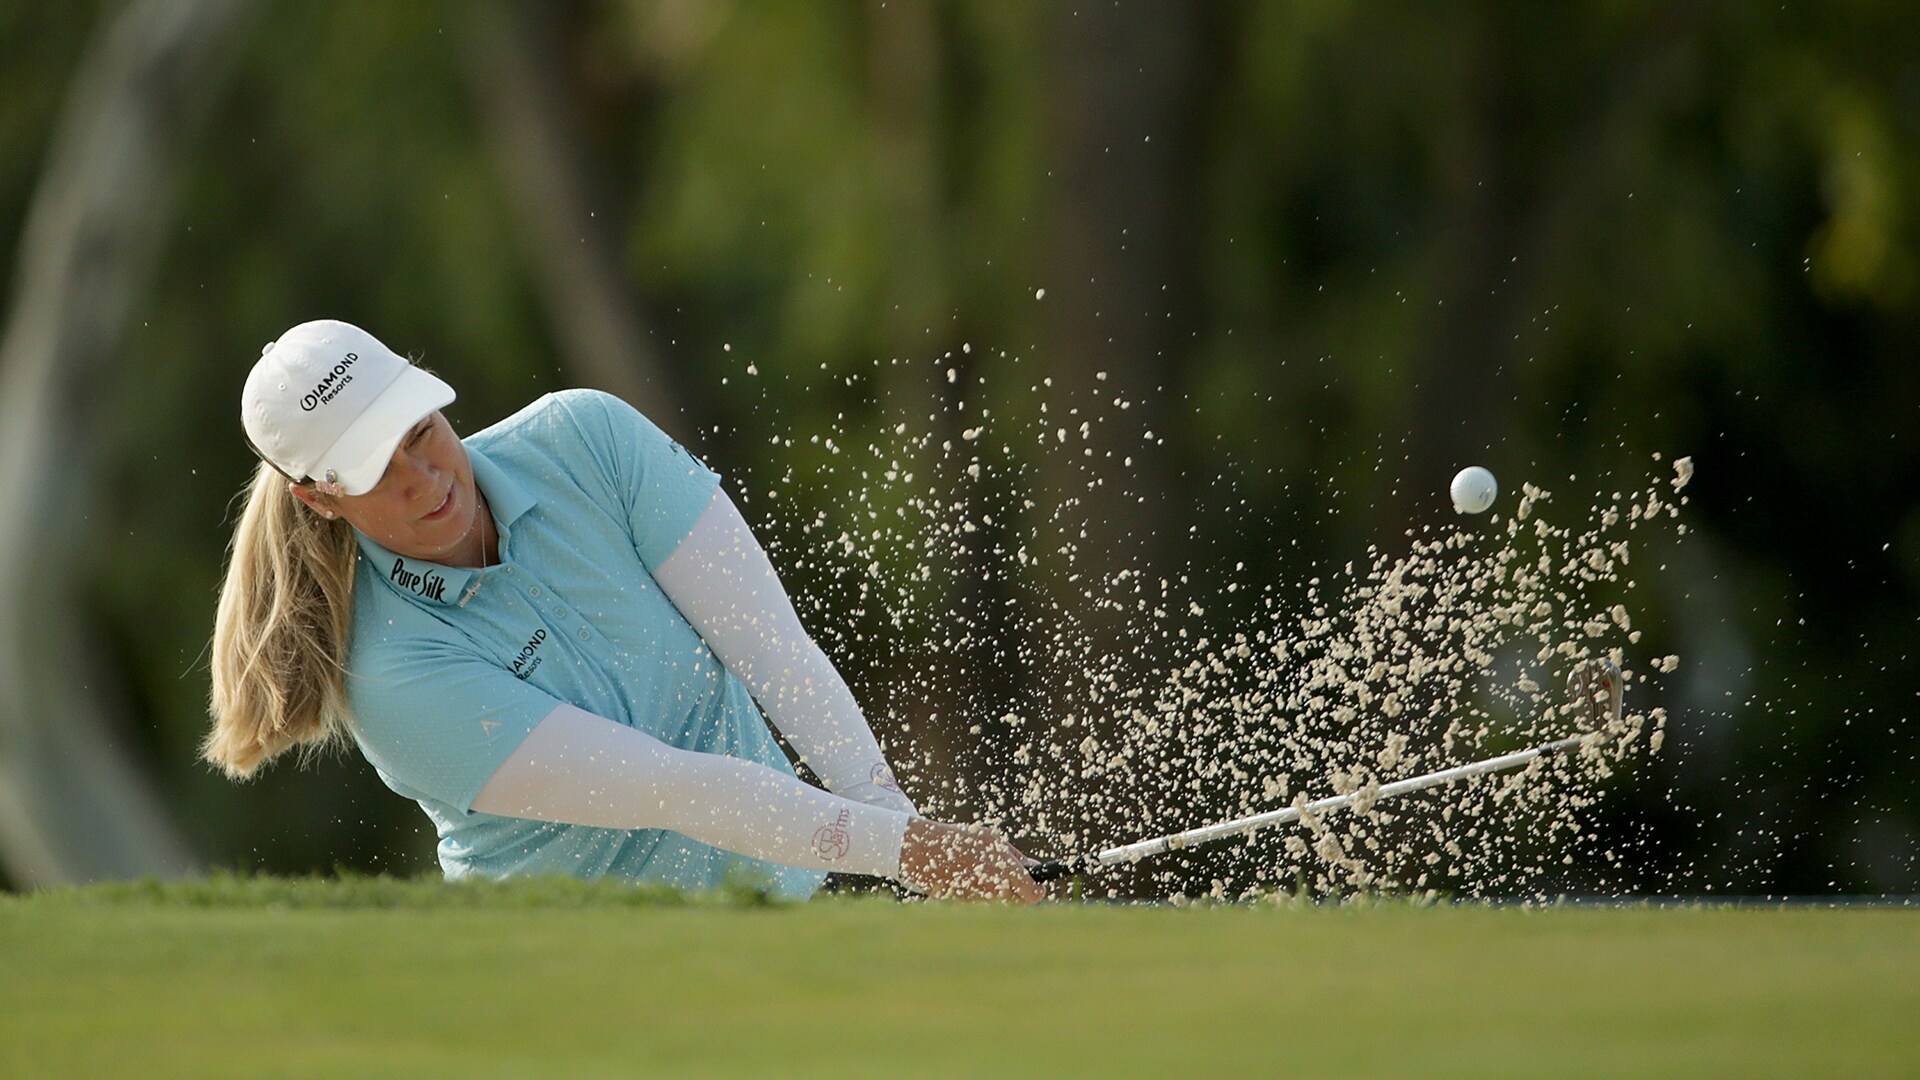 Thumb Injury Doesn’t Keep Brittany Lincicome From Opening 69 at ANA Inspiration